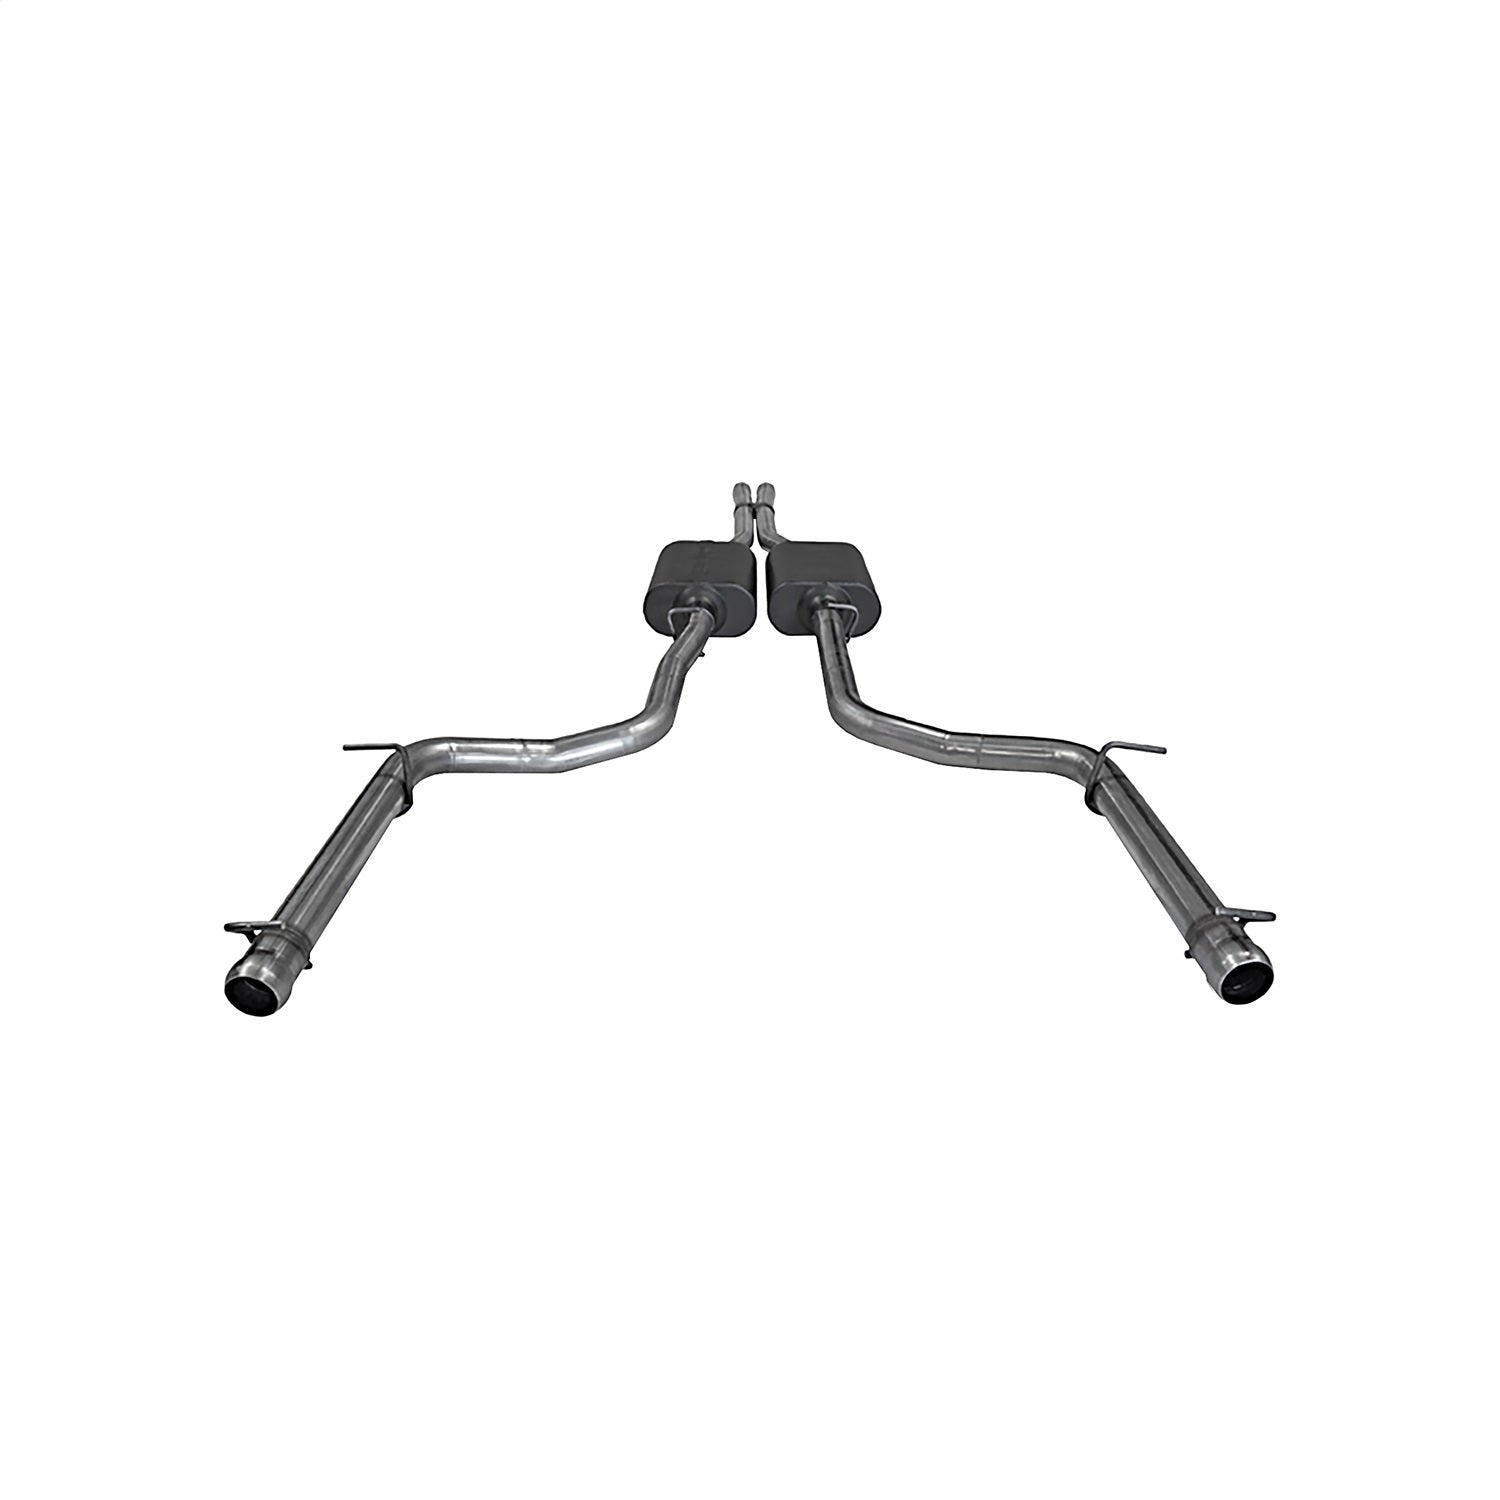 Flowmaster 817479 American Thunder Cat Back Exhaust System Fits 09-14 Challenger